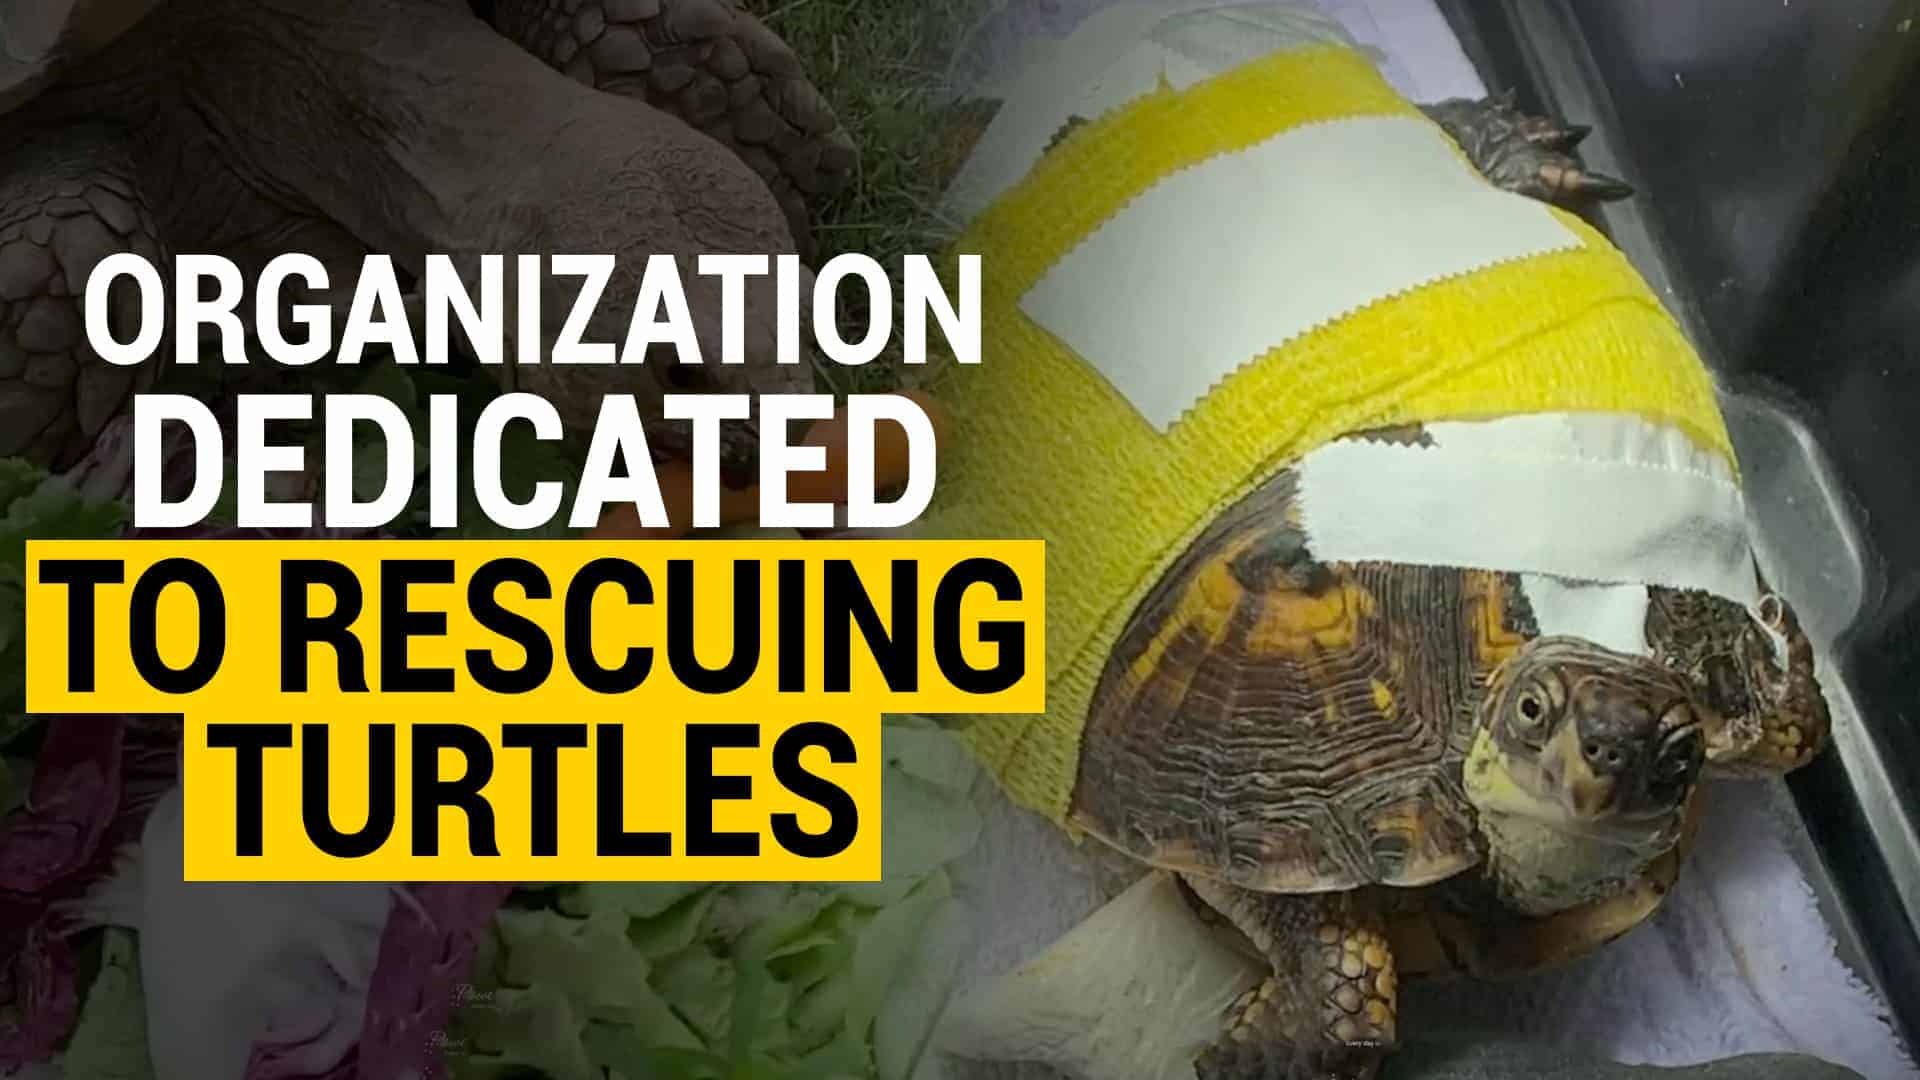 Turtle Rescue Saves Over 150 Lives Every Year